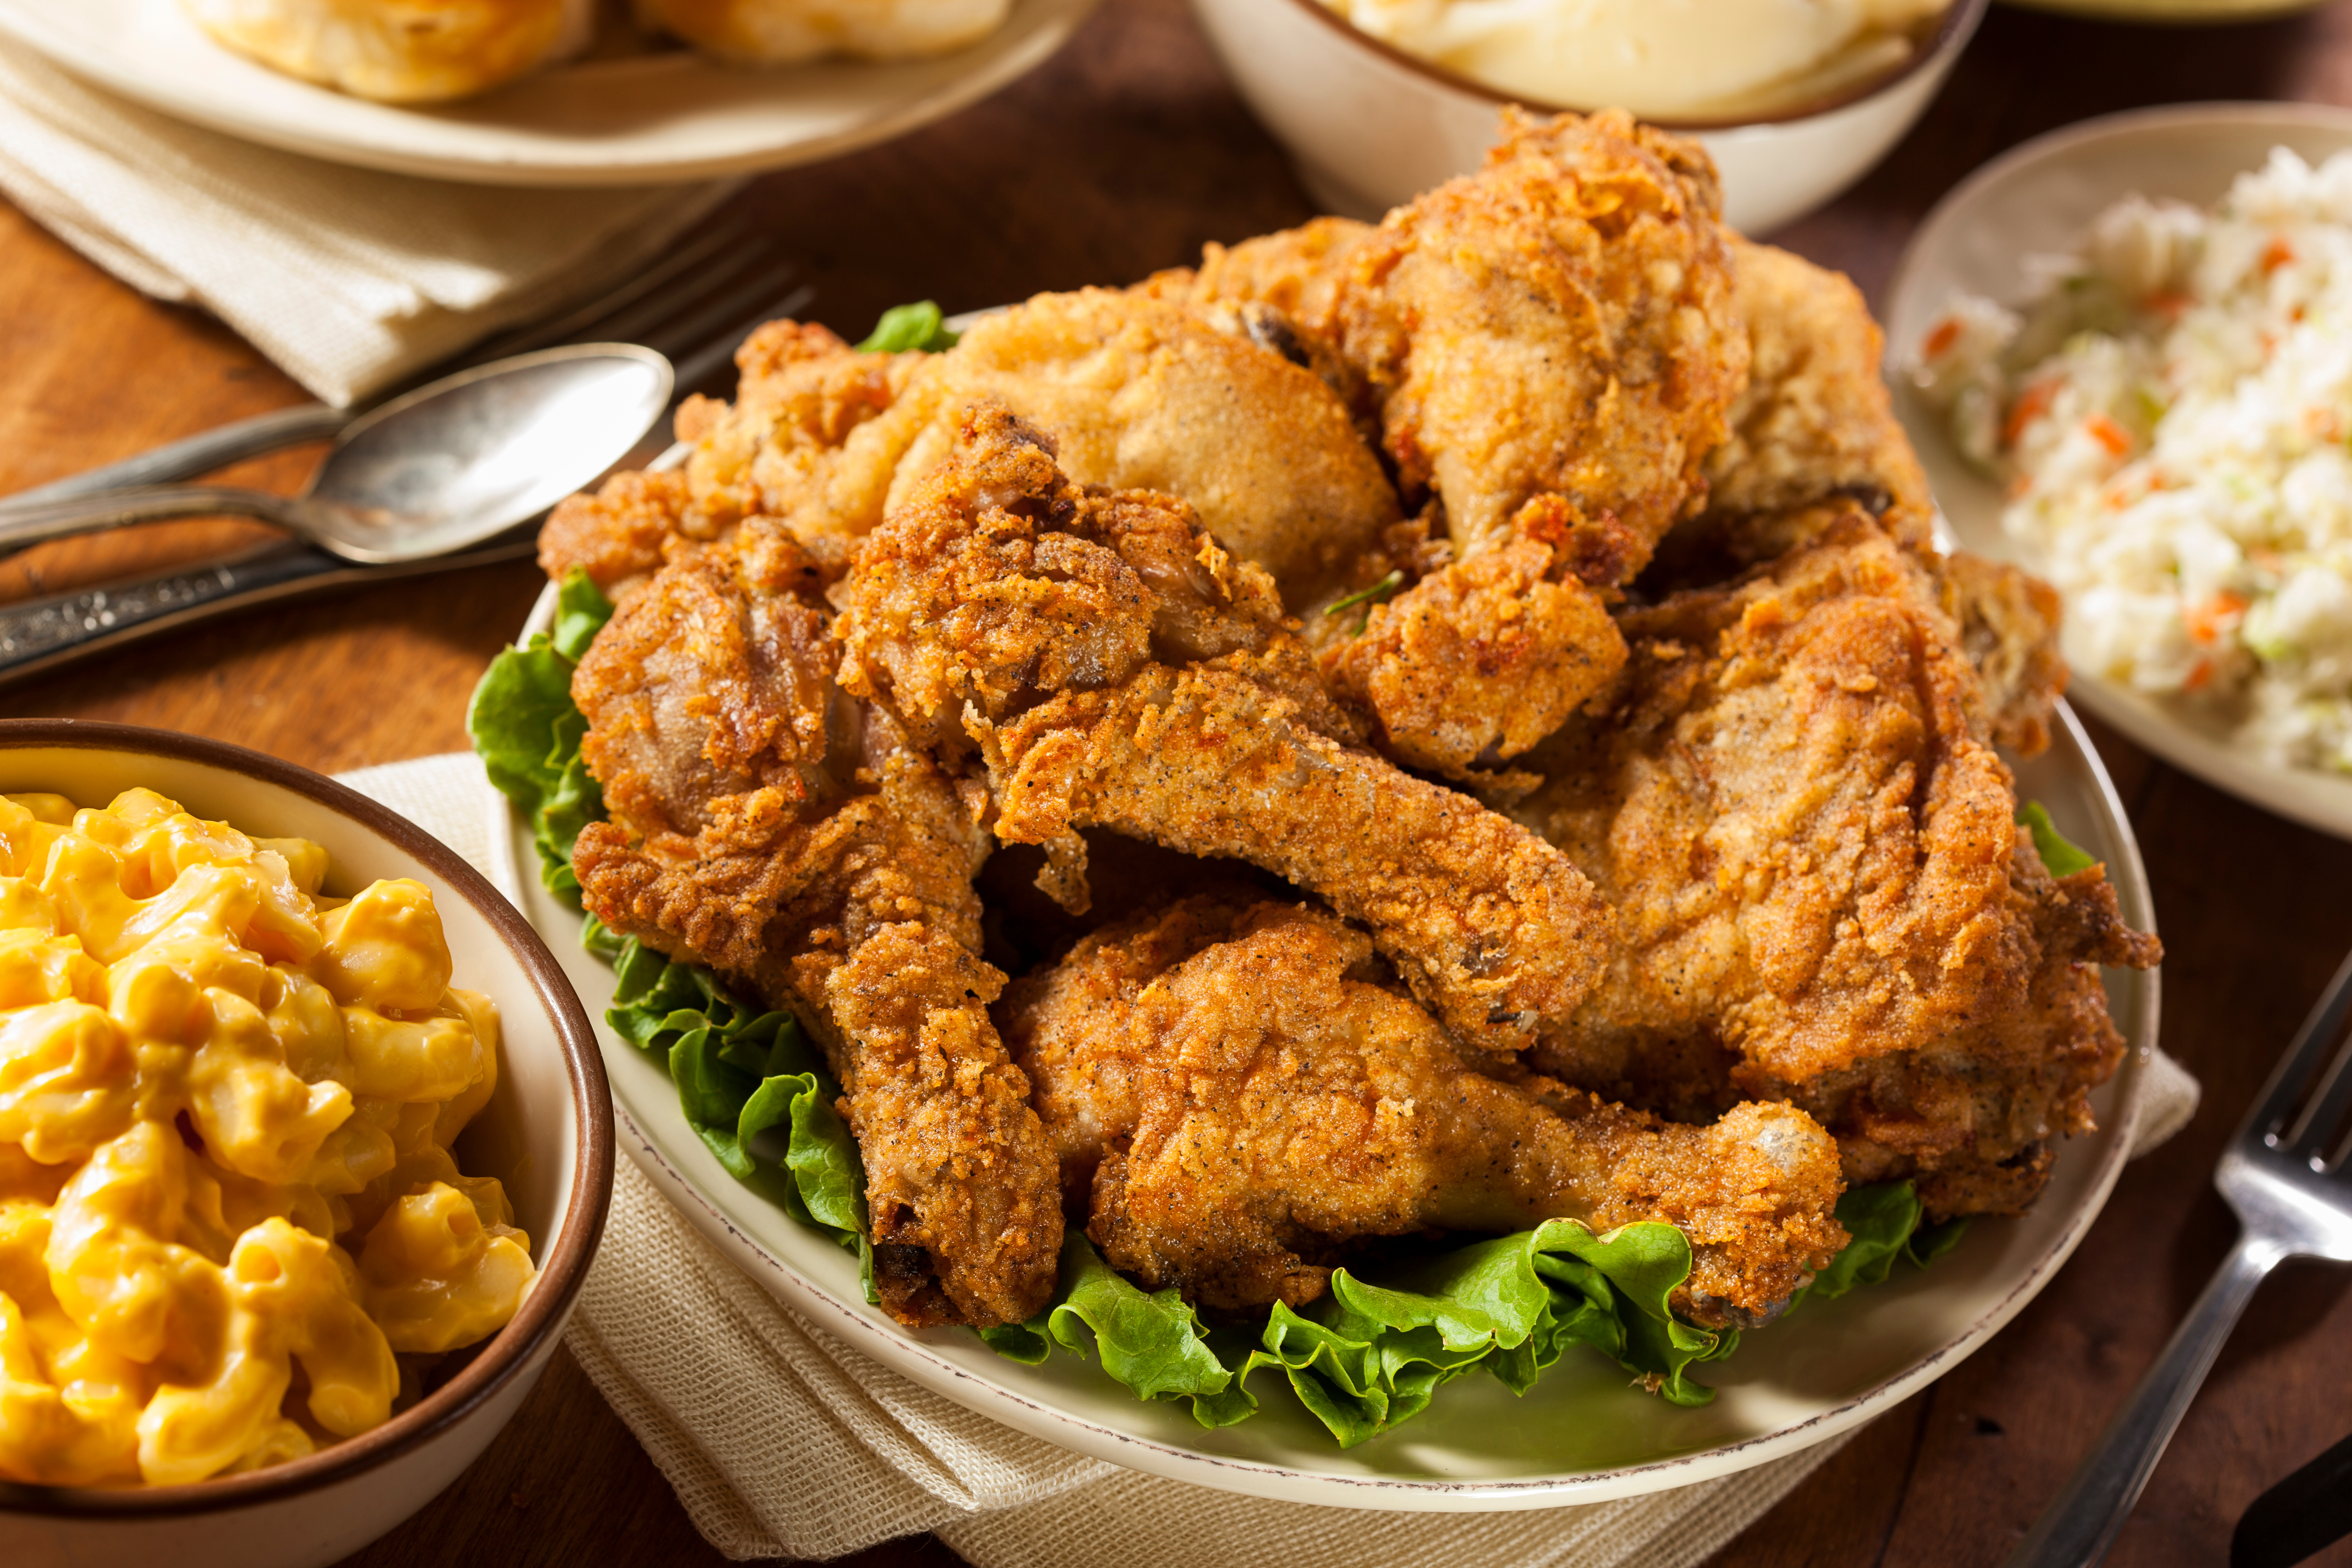 National Fried Chicken Day: Facts and Figures